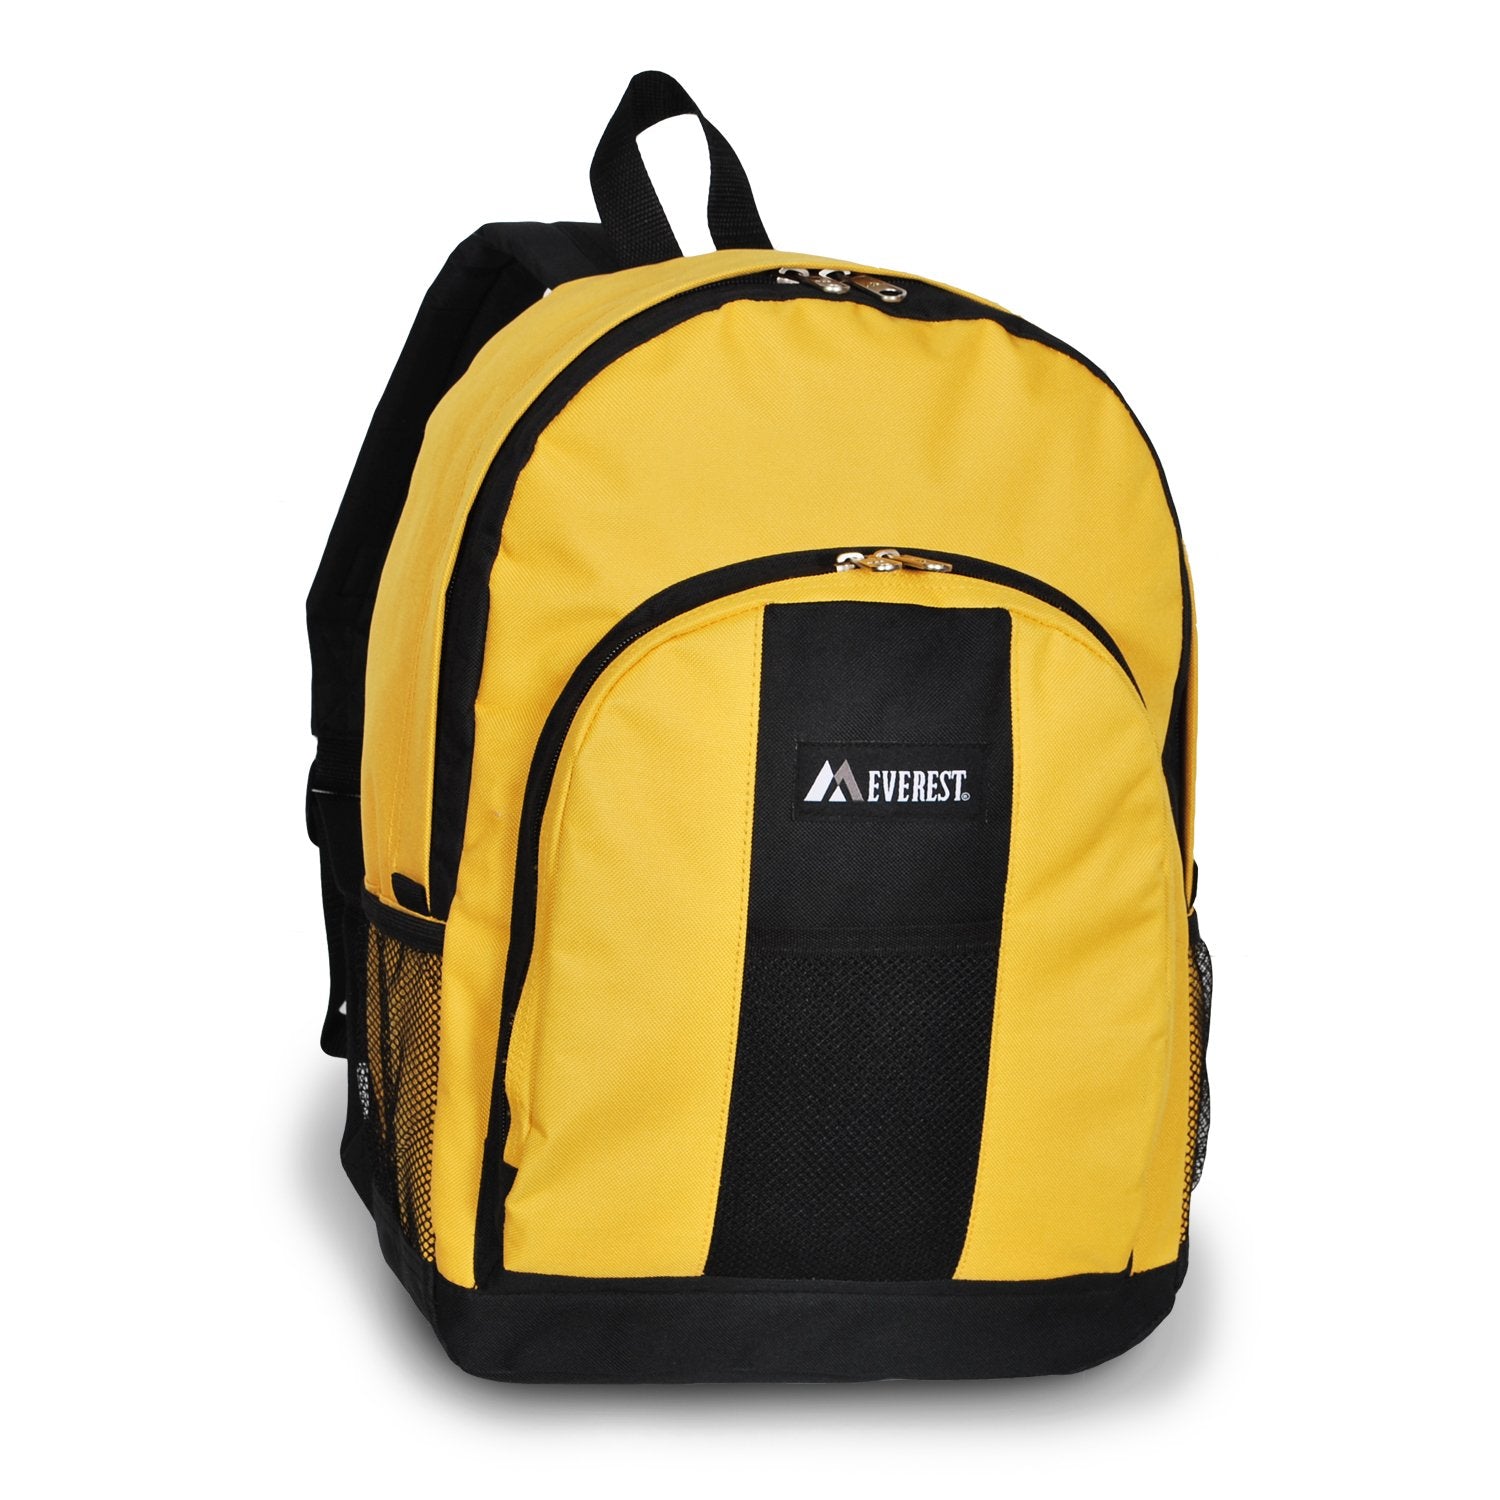 Everest-Backpack w/ Front & Side Pockets-eSafety Supplies, Inc